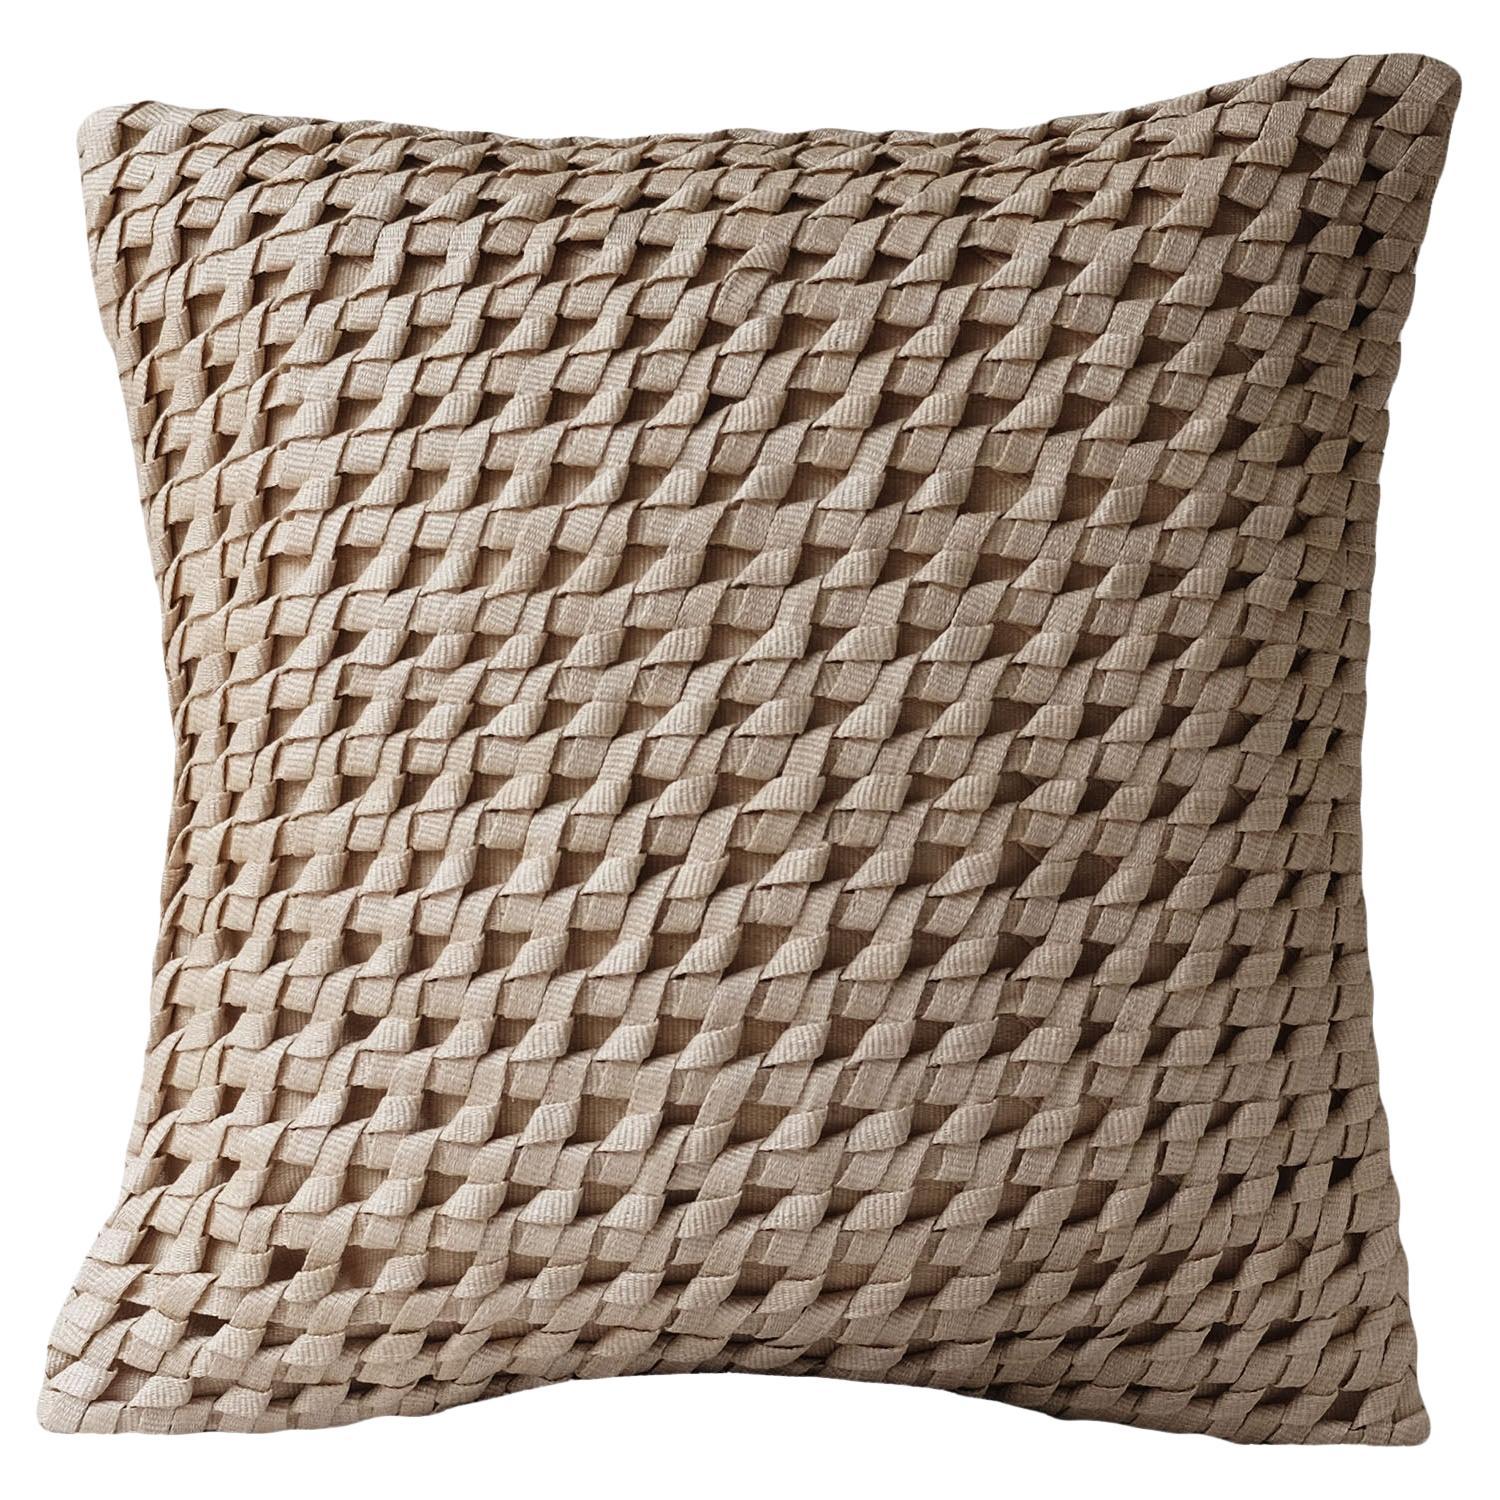 Handcrafted T'nalak Diagonal Knot Weave Cushion Cover